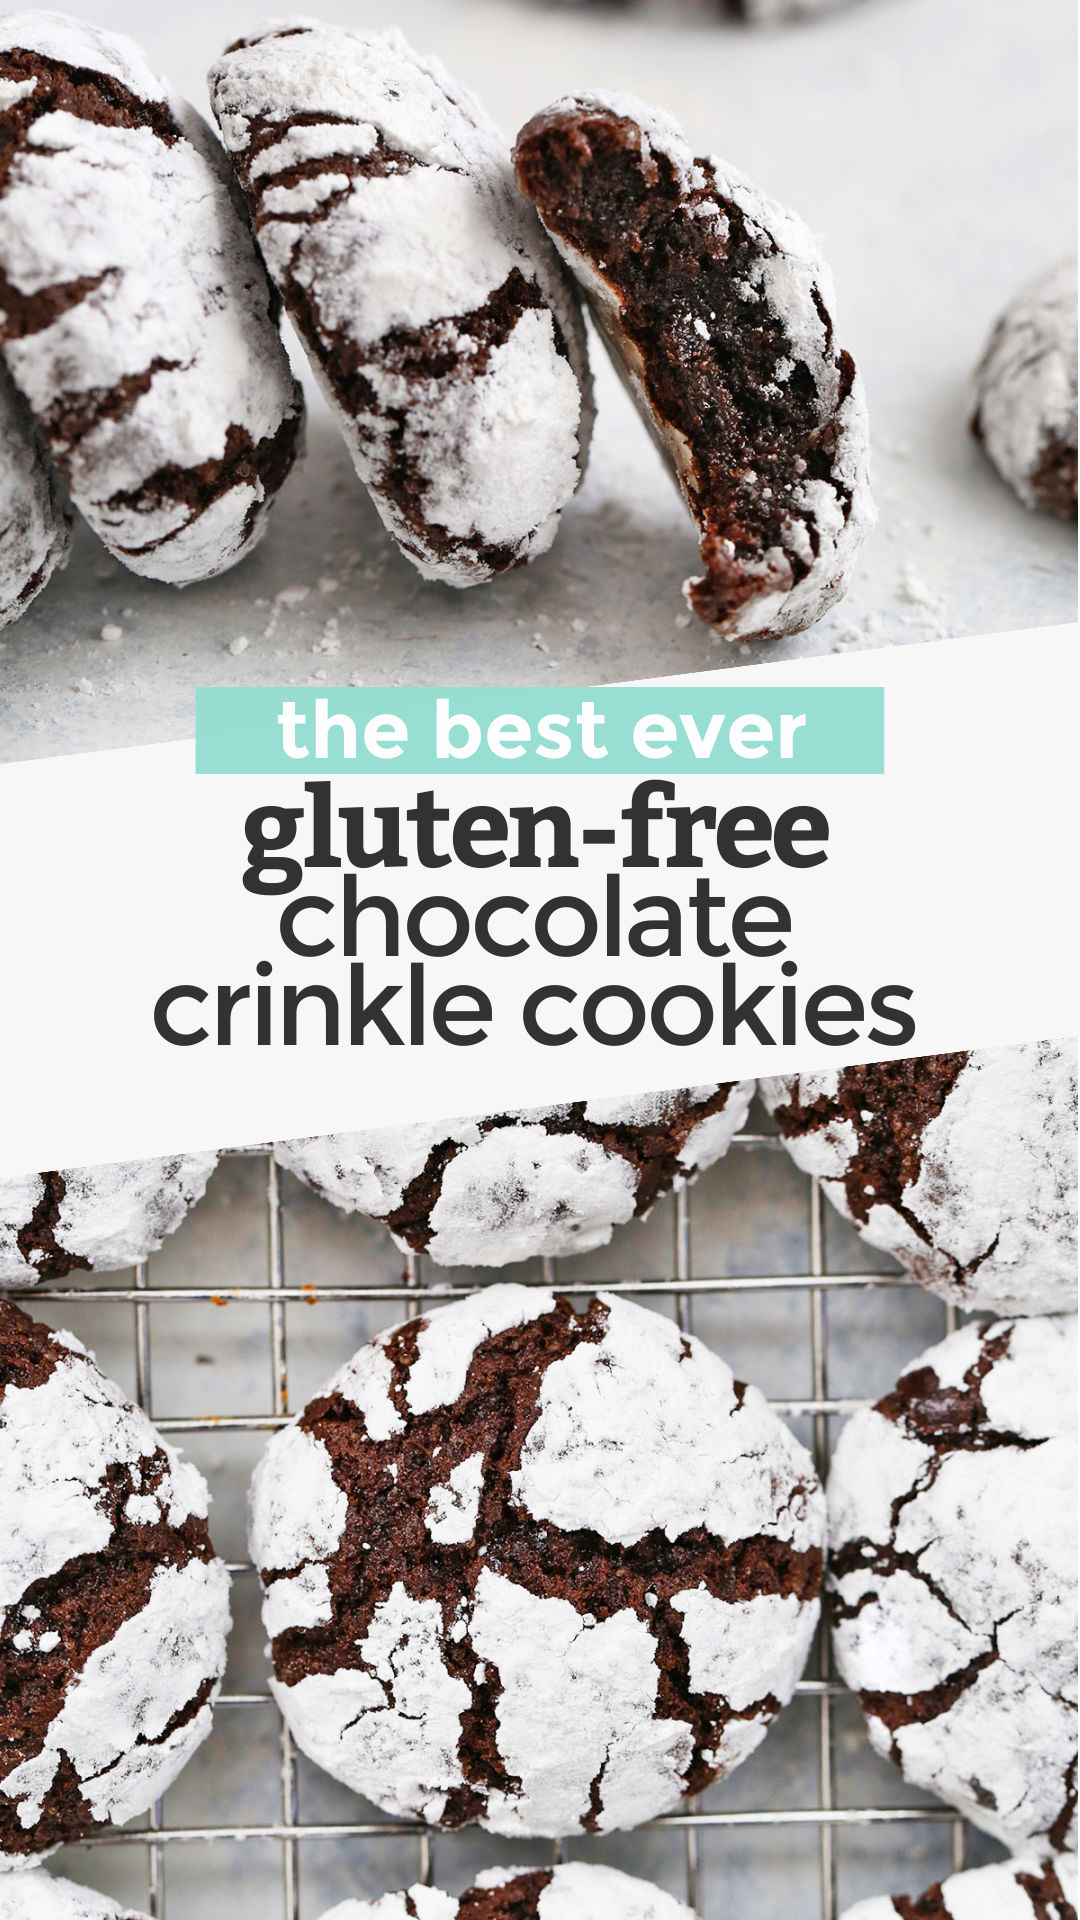 Gluten-Free Chocolate Crinkle Cookies - These gorgeous gluten-free crinkle cookies are ultra-fudgy and absolutely delicious! Perfect for the holidays or your next chocolate craving. (Gluten-Free & Dairy Free) // Crinkle Cookies Recipe // Chocolate Crinkle Cookies Recipe // Gluten Free Christmas Cookies //